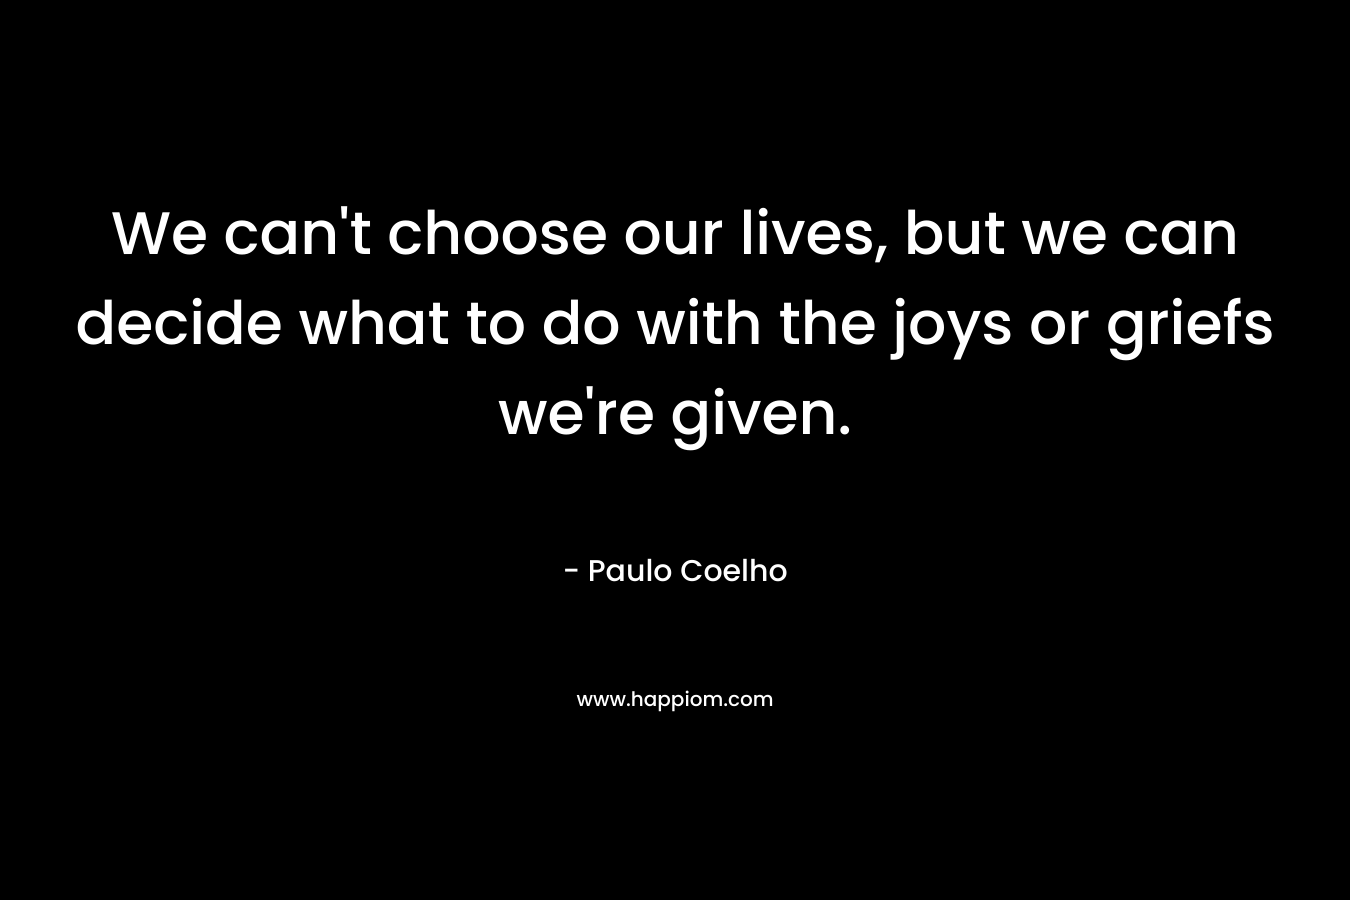 We can’t choose our lives, but we can decide what to do with the joys or griefs we’re given. – Paulo Coelho